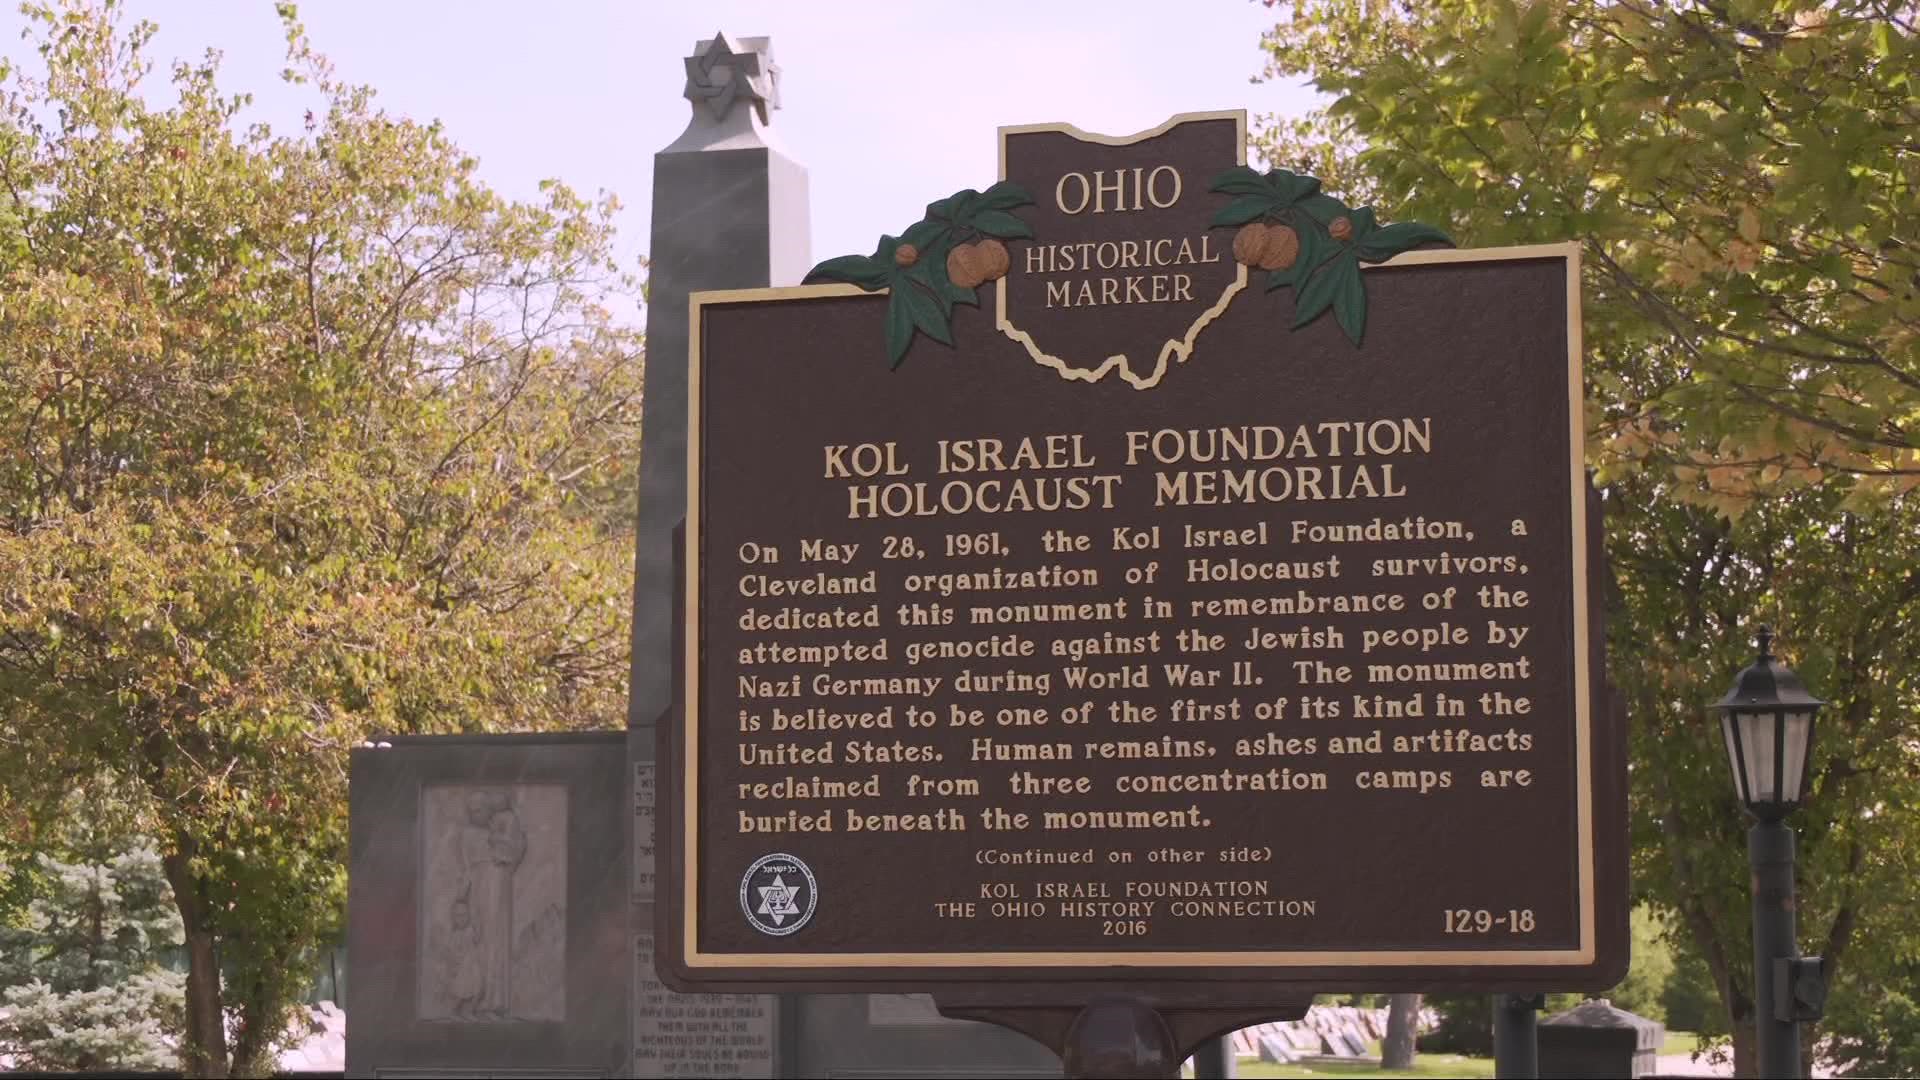 The Kol Israel Holocaust Memorial in Bedford Heights is the first holocaust memorial in the United States to be given national memorial status.